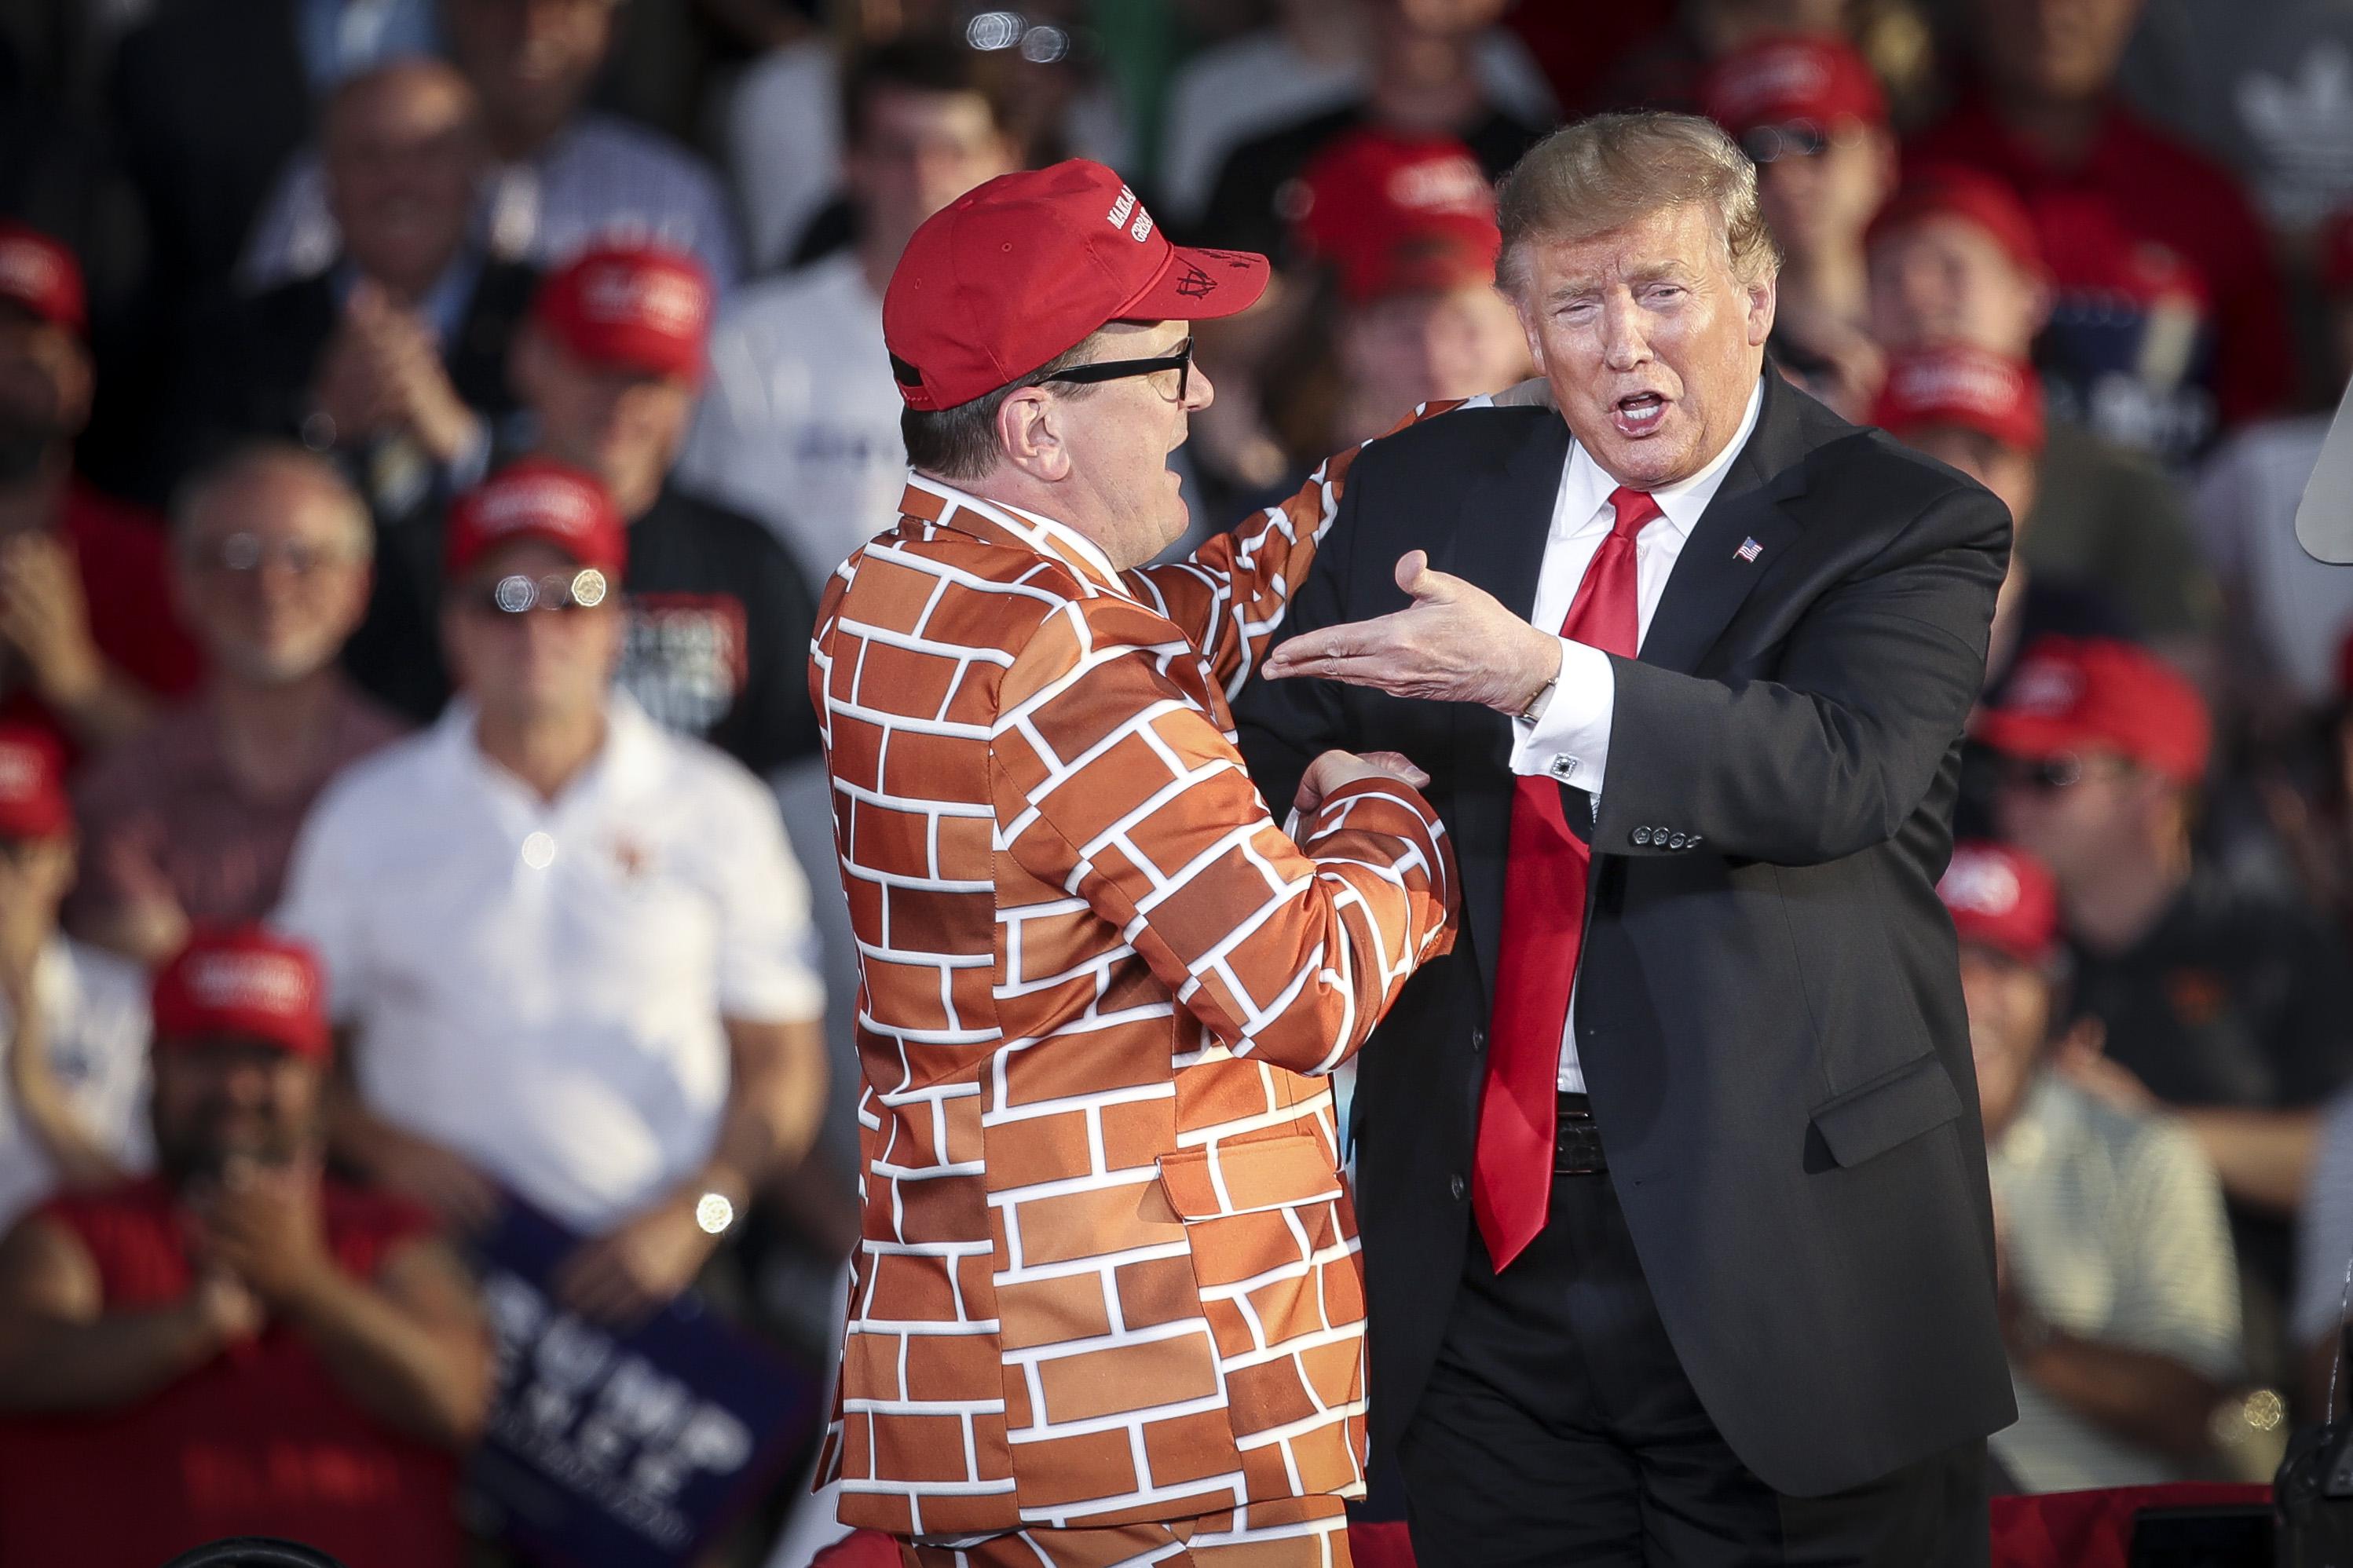 President Donald Trump calls up Blake Marnell, wearing a jacket with bricks representing a border wall, to the stage during a campaign rally at Williamsport Regional Airport, May 20, 2019 in Montoursville, Pennsylvania. 